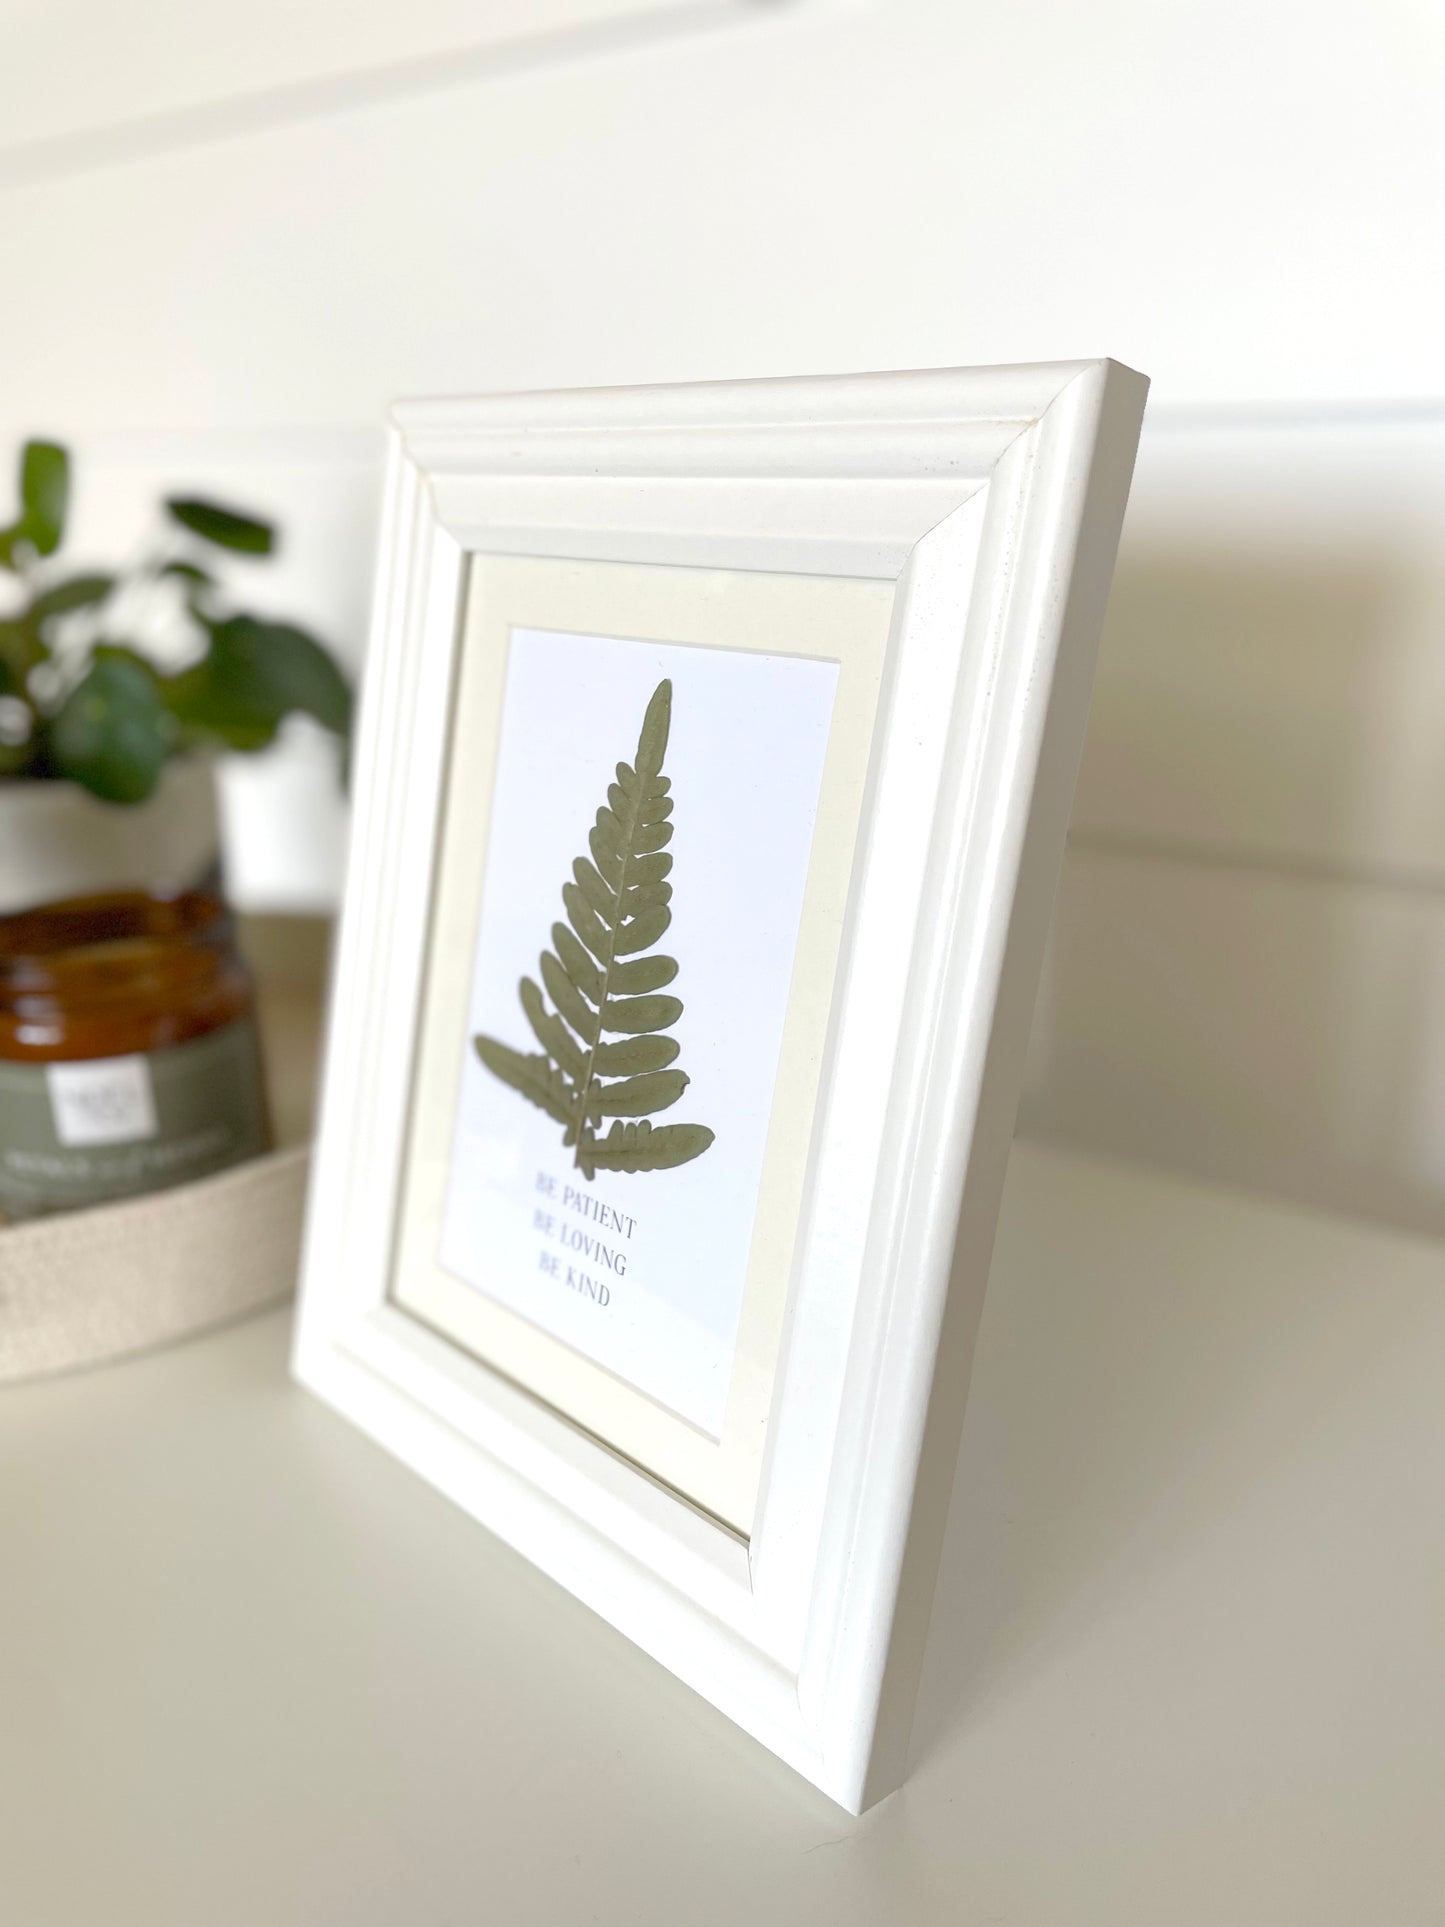 Be Patient, Be Loving, Be Kind - Real Pressed Wild Fern Framed